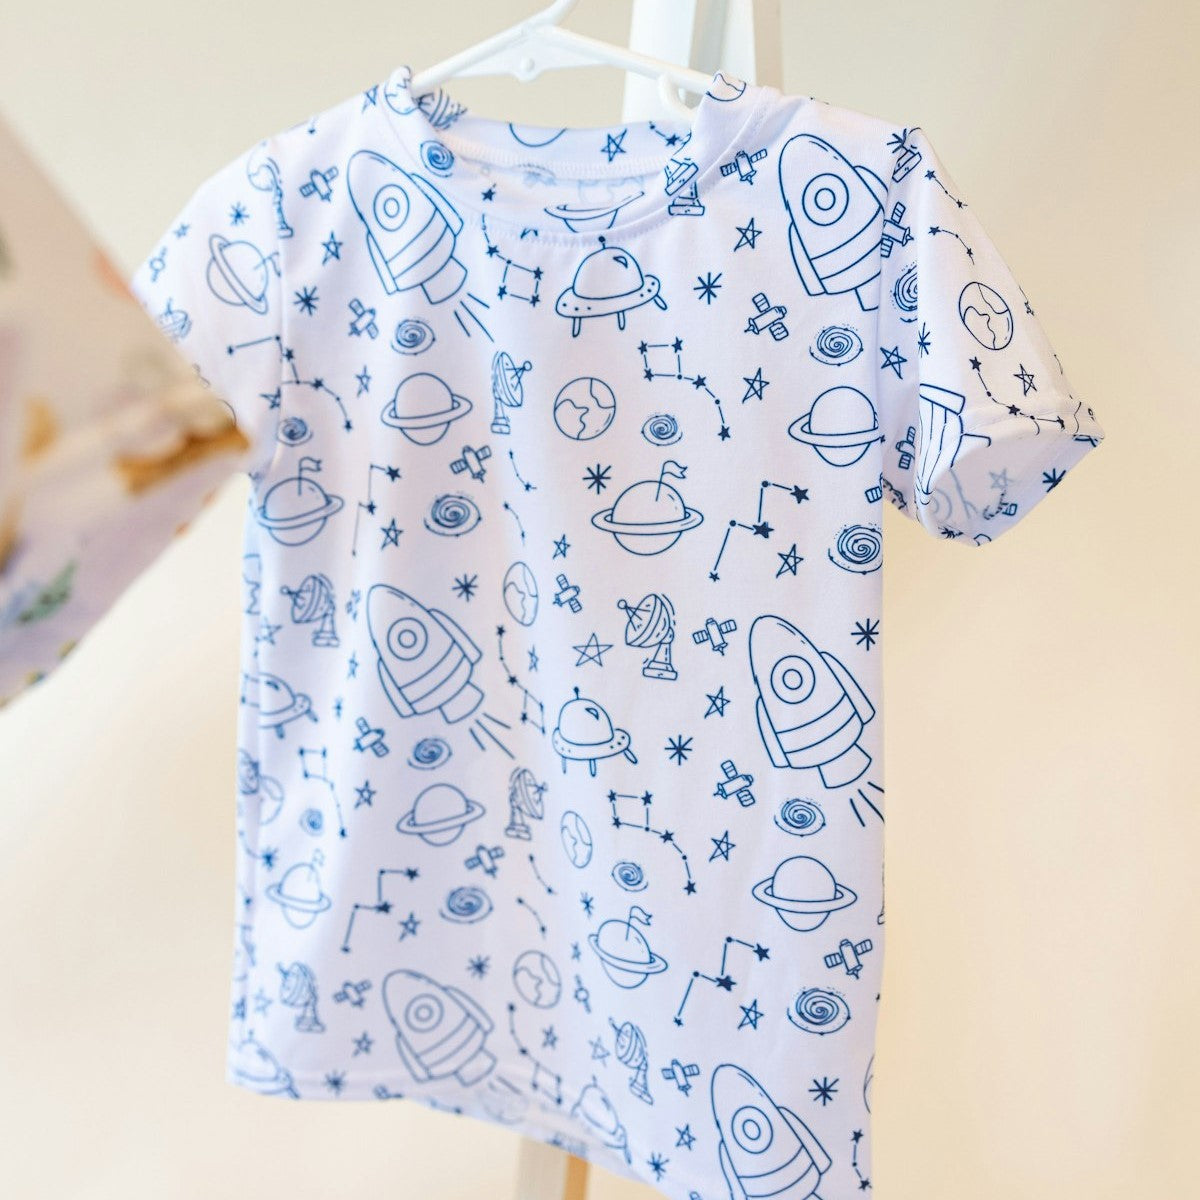 blue and white shirt with space theme